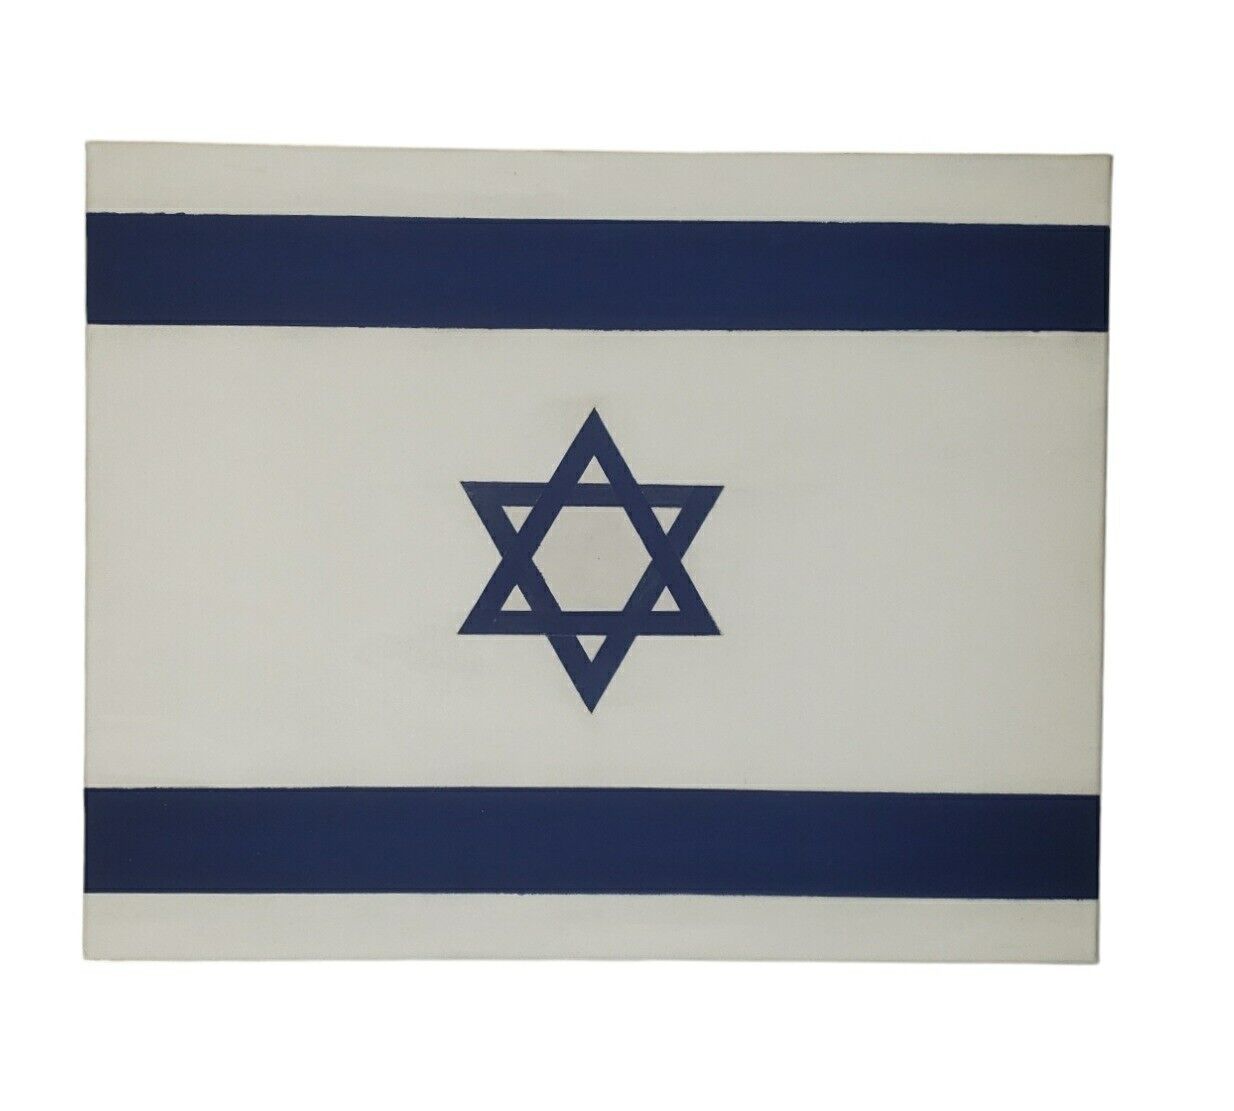 Israel Flag Painting Hard Edge Painting On Canvas By Artist H. Bar